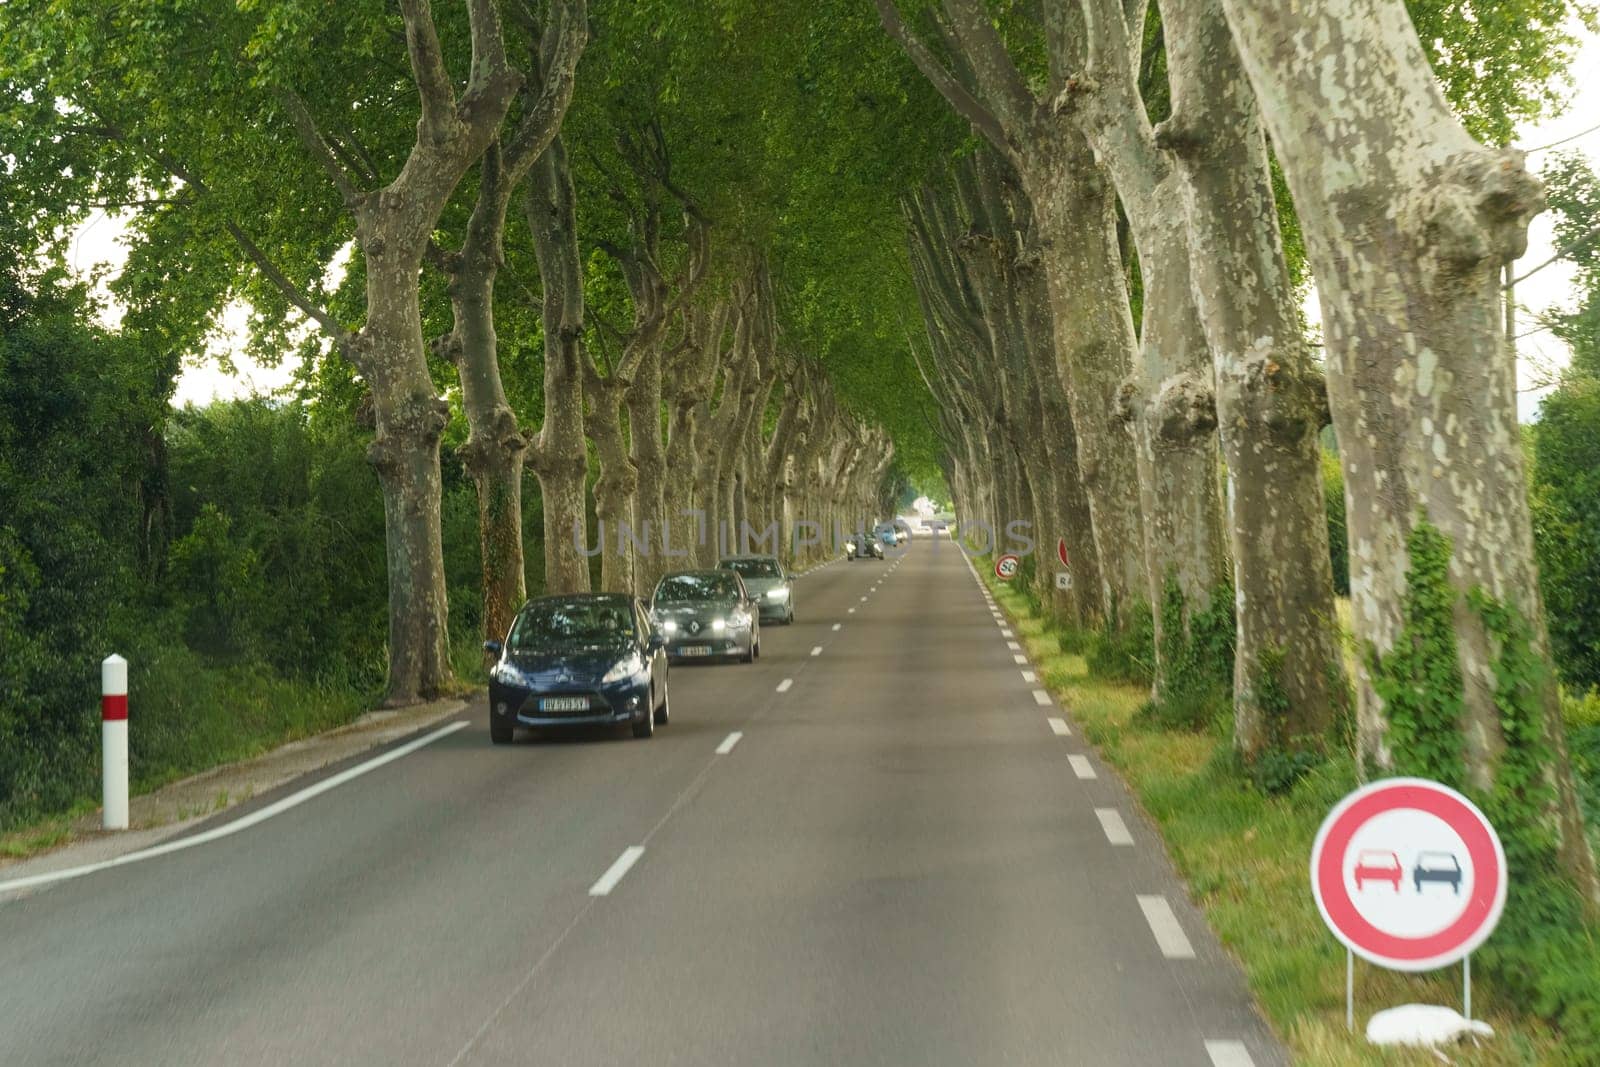 Nimes, France - May 30, 2023: Cars drive along a peaceful road flanked by tall, leafy trees, under a soft daylight, adhering to the no overtaking road sign.